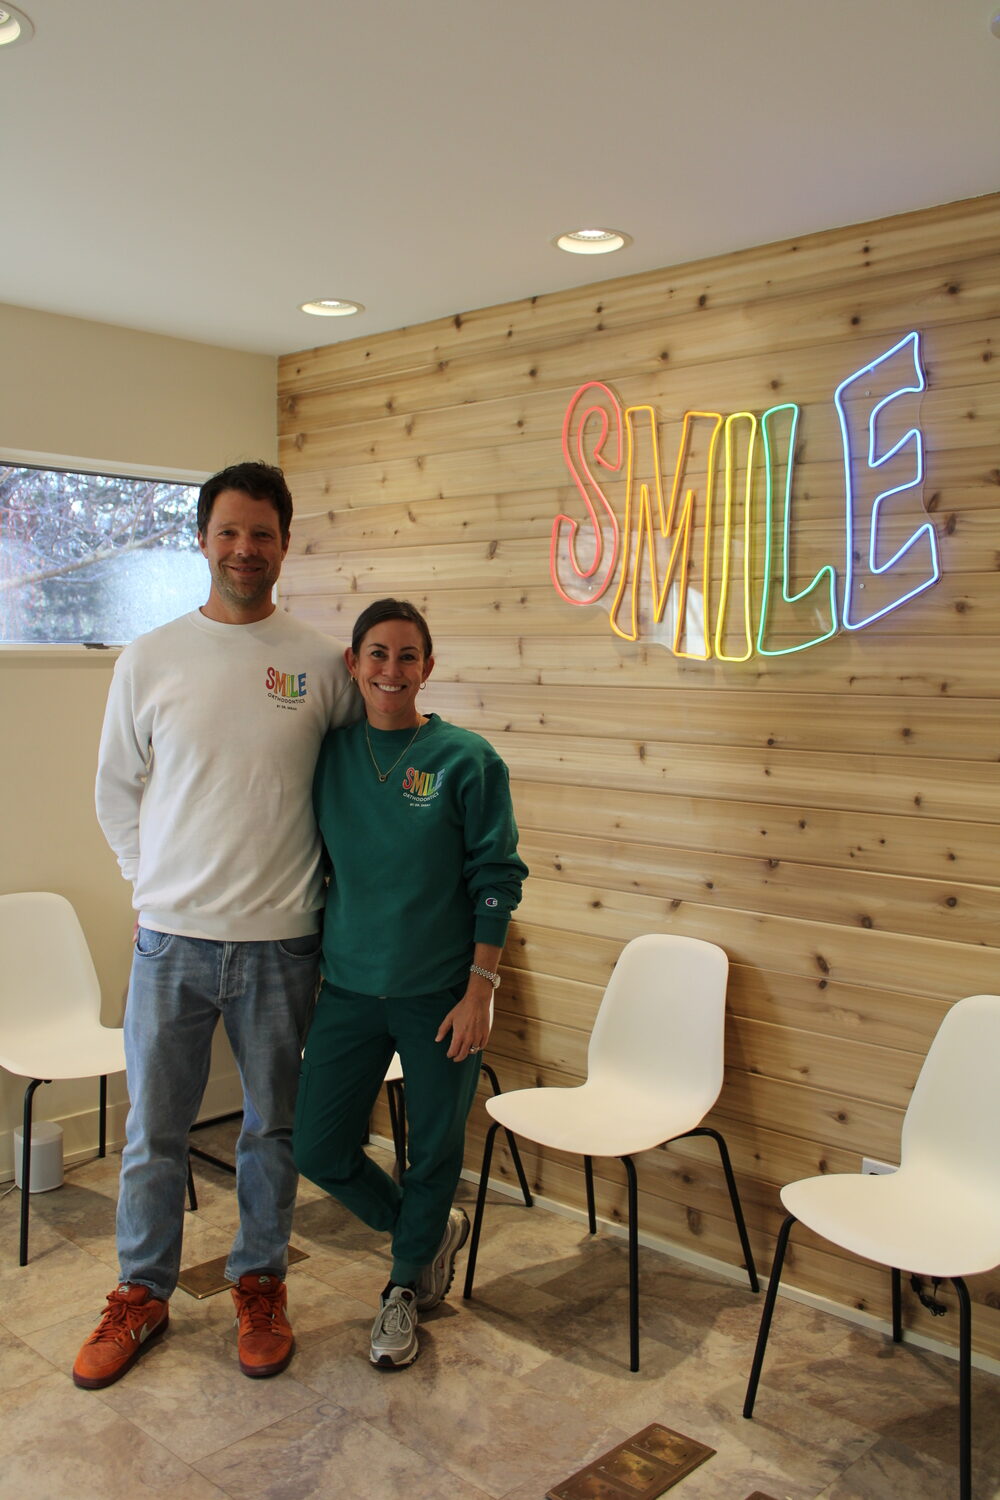 Paul and Sarah Schroetter in the East Hampton office of Smile Orthodontics, which offers braces to two needy kids per year. ELIZABETH VESPE